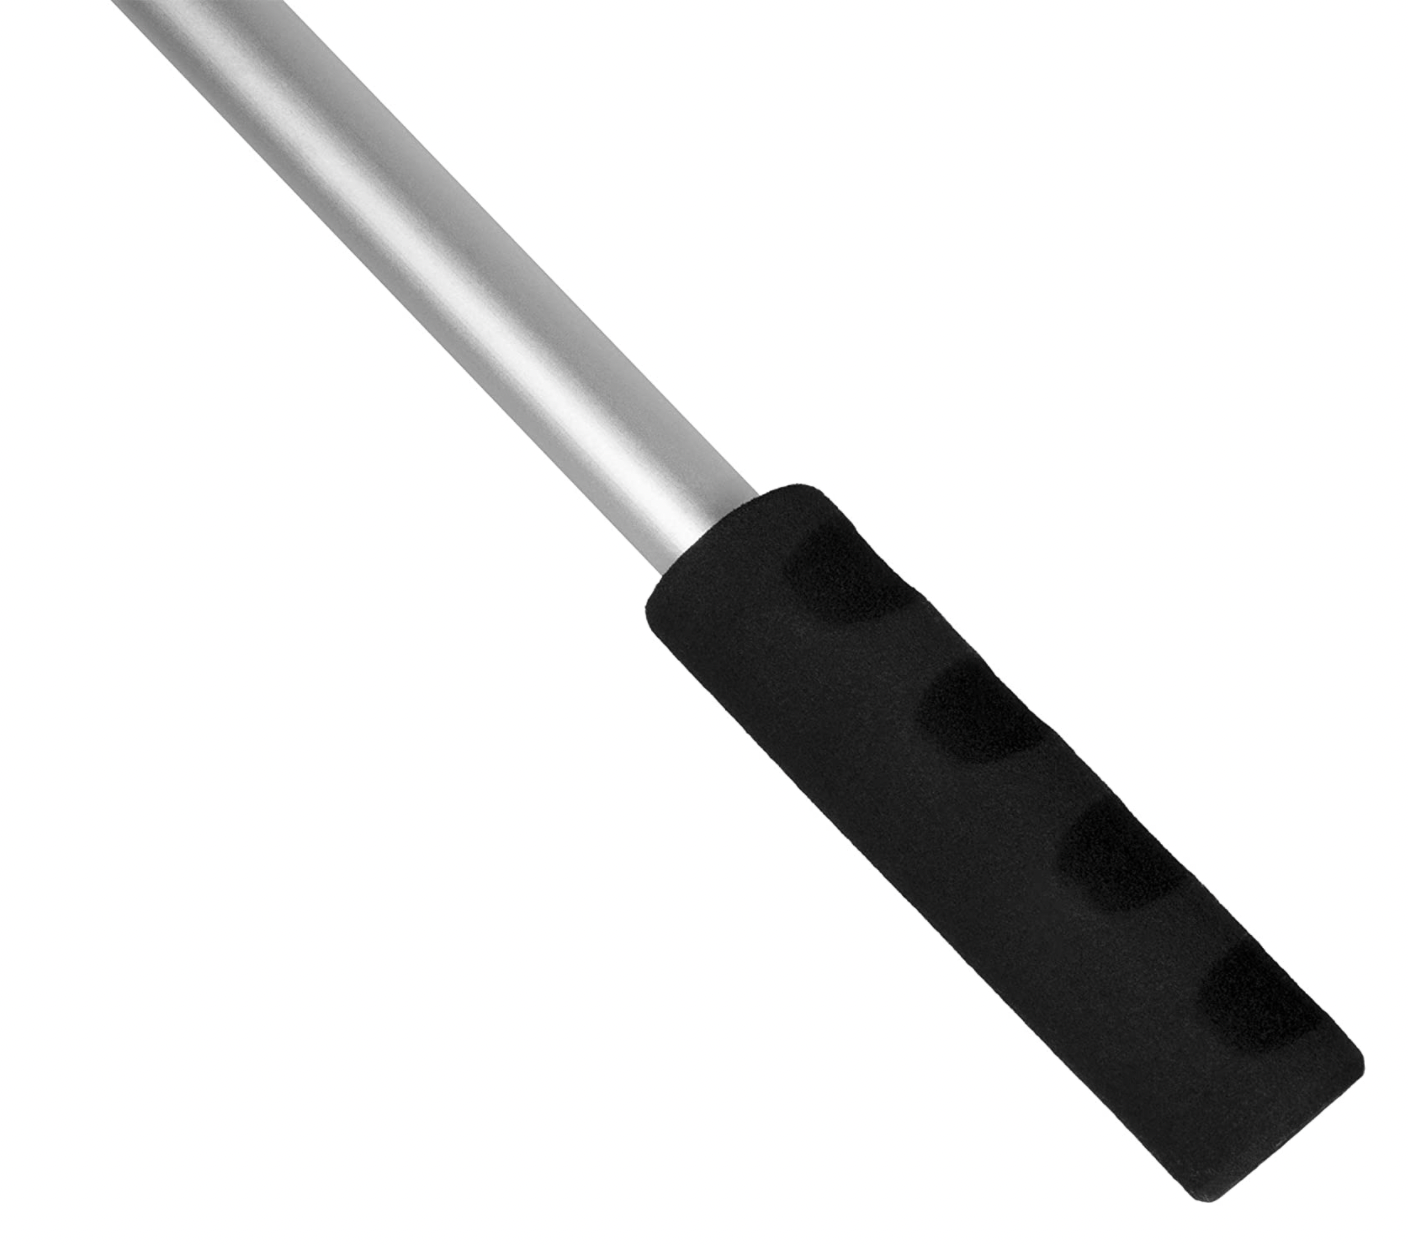 Aluminium Pole Extendable From 36" to 62" - Local Delivery Only